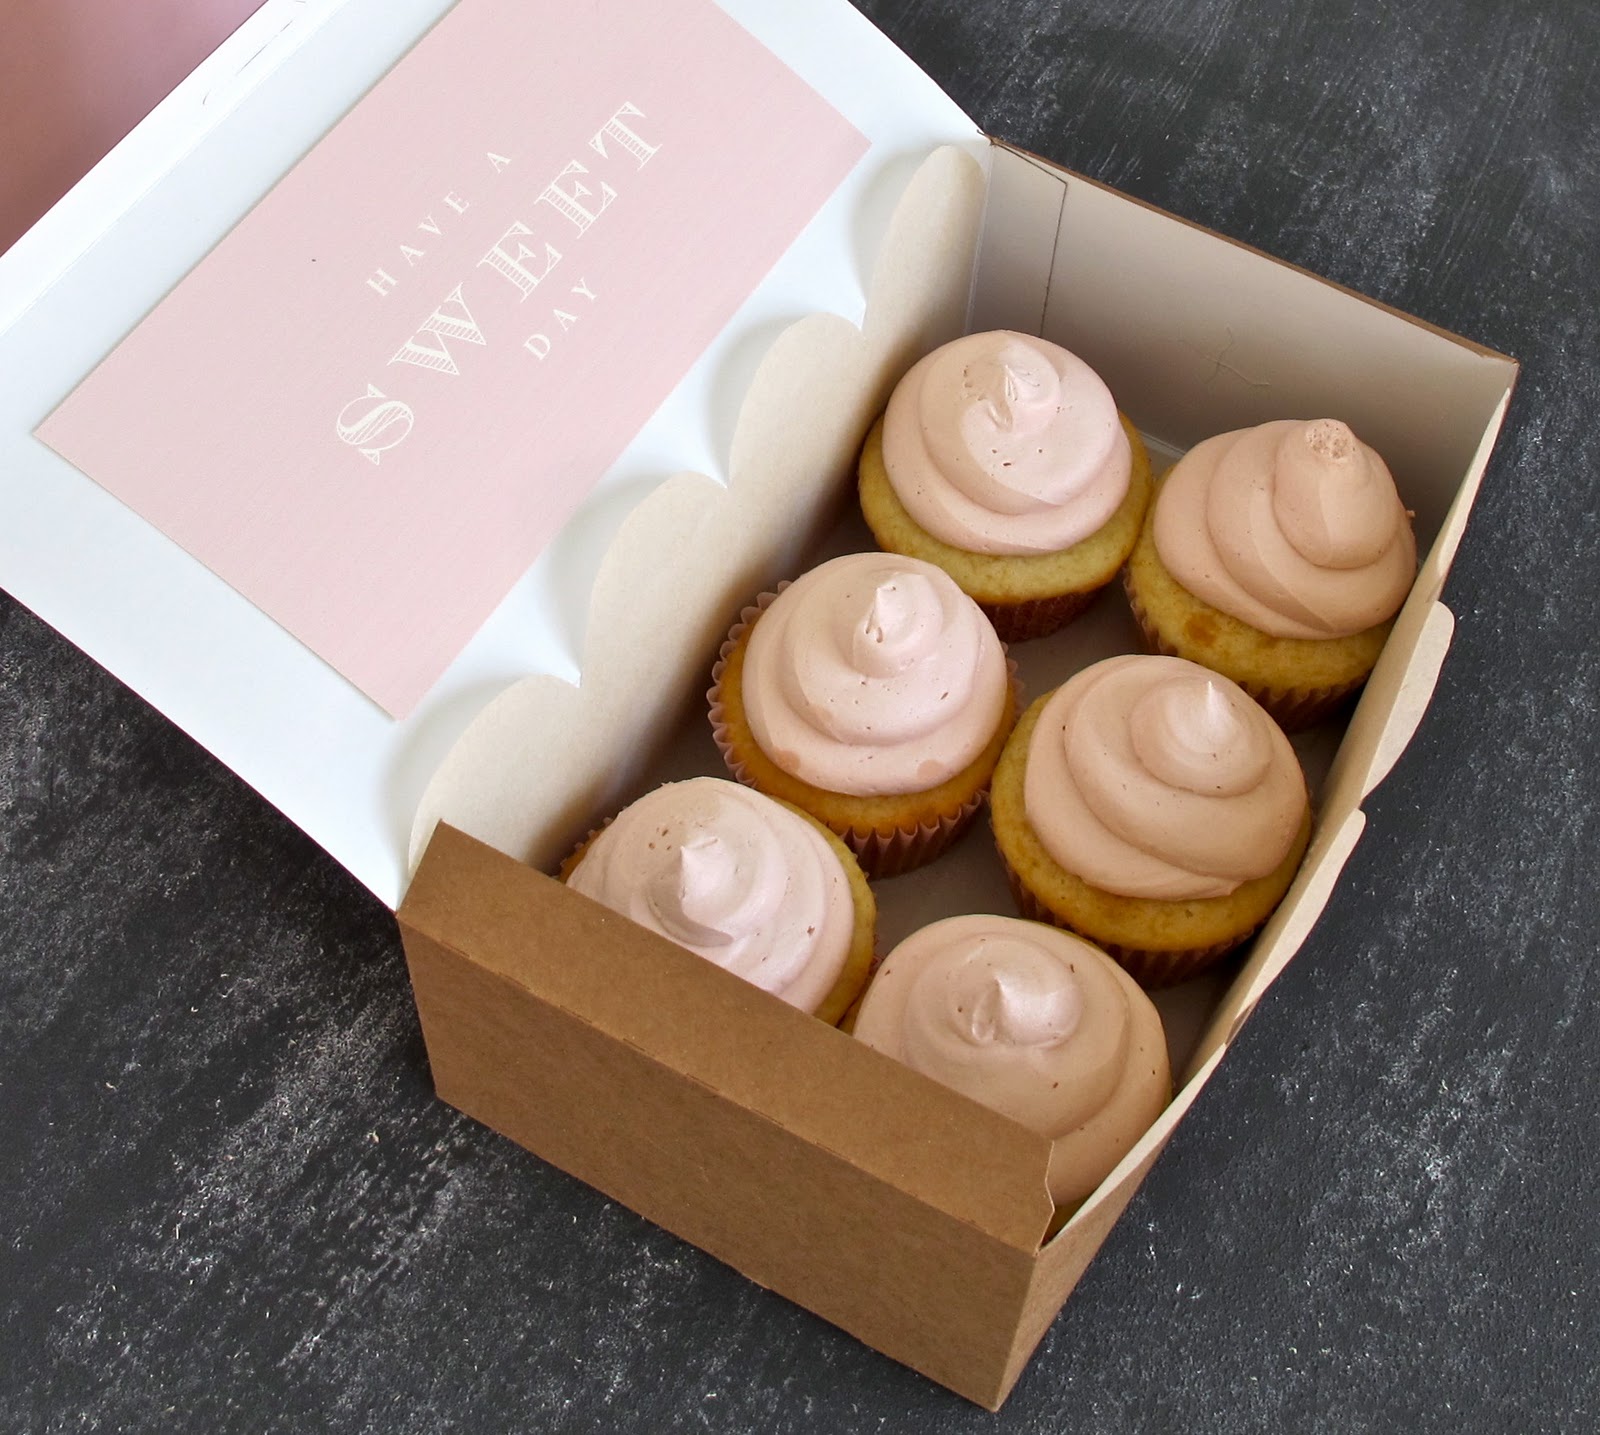 9 Photos of Valentine's Day Packaging Cupcakes